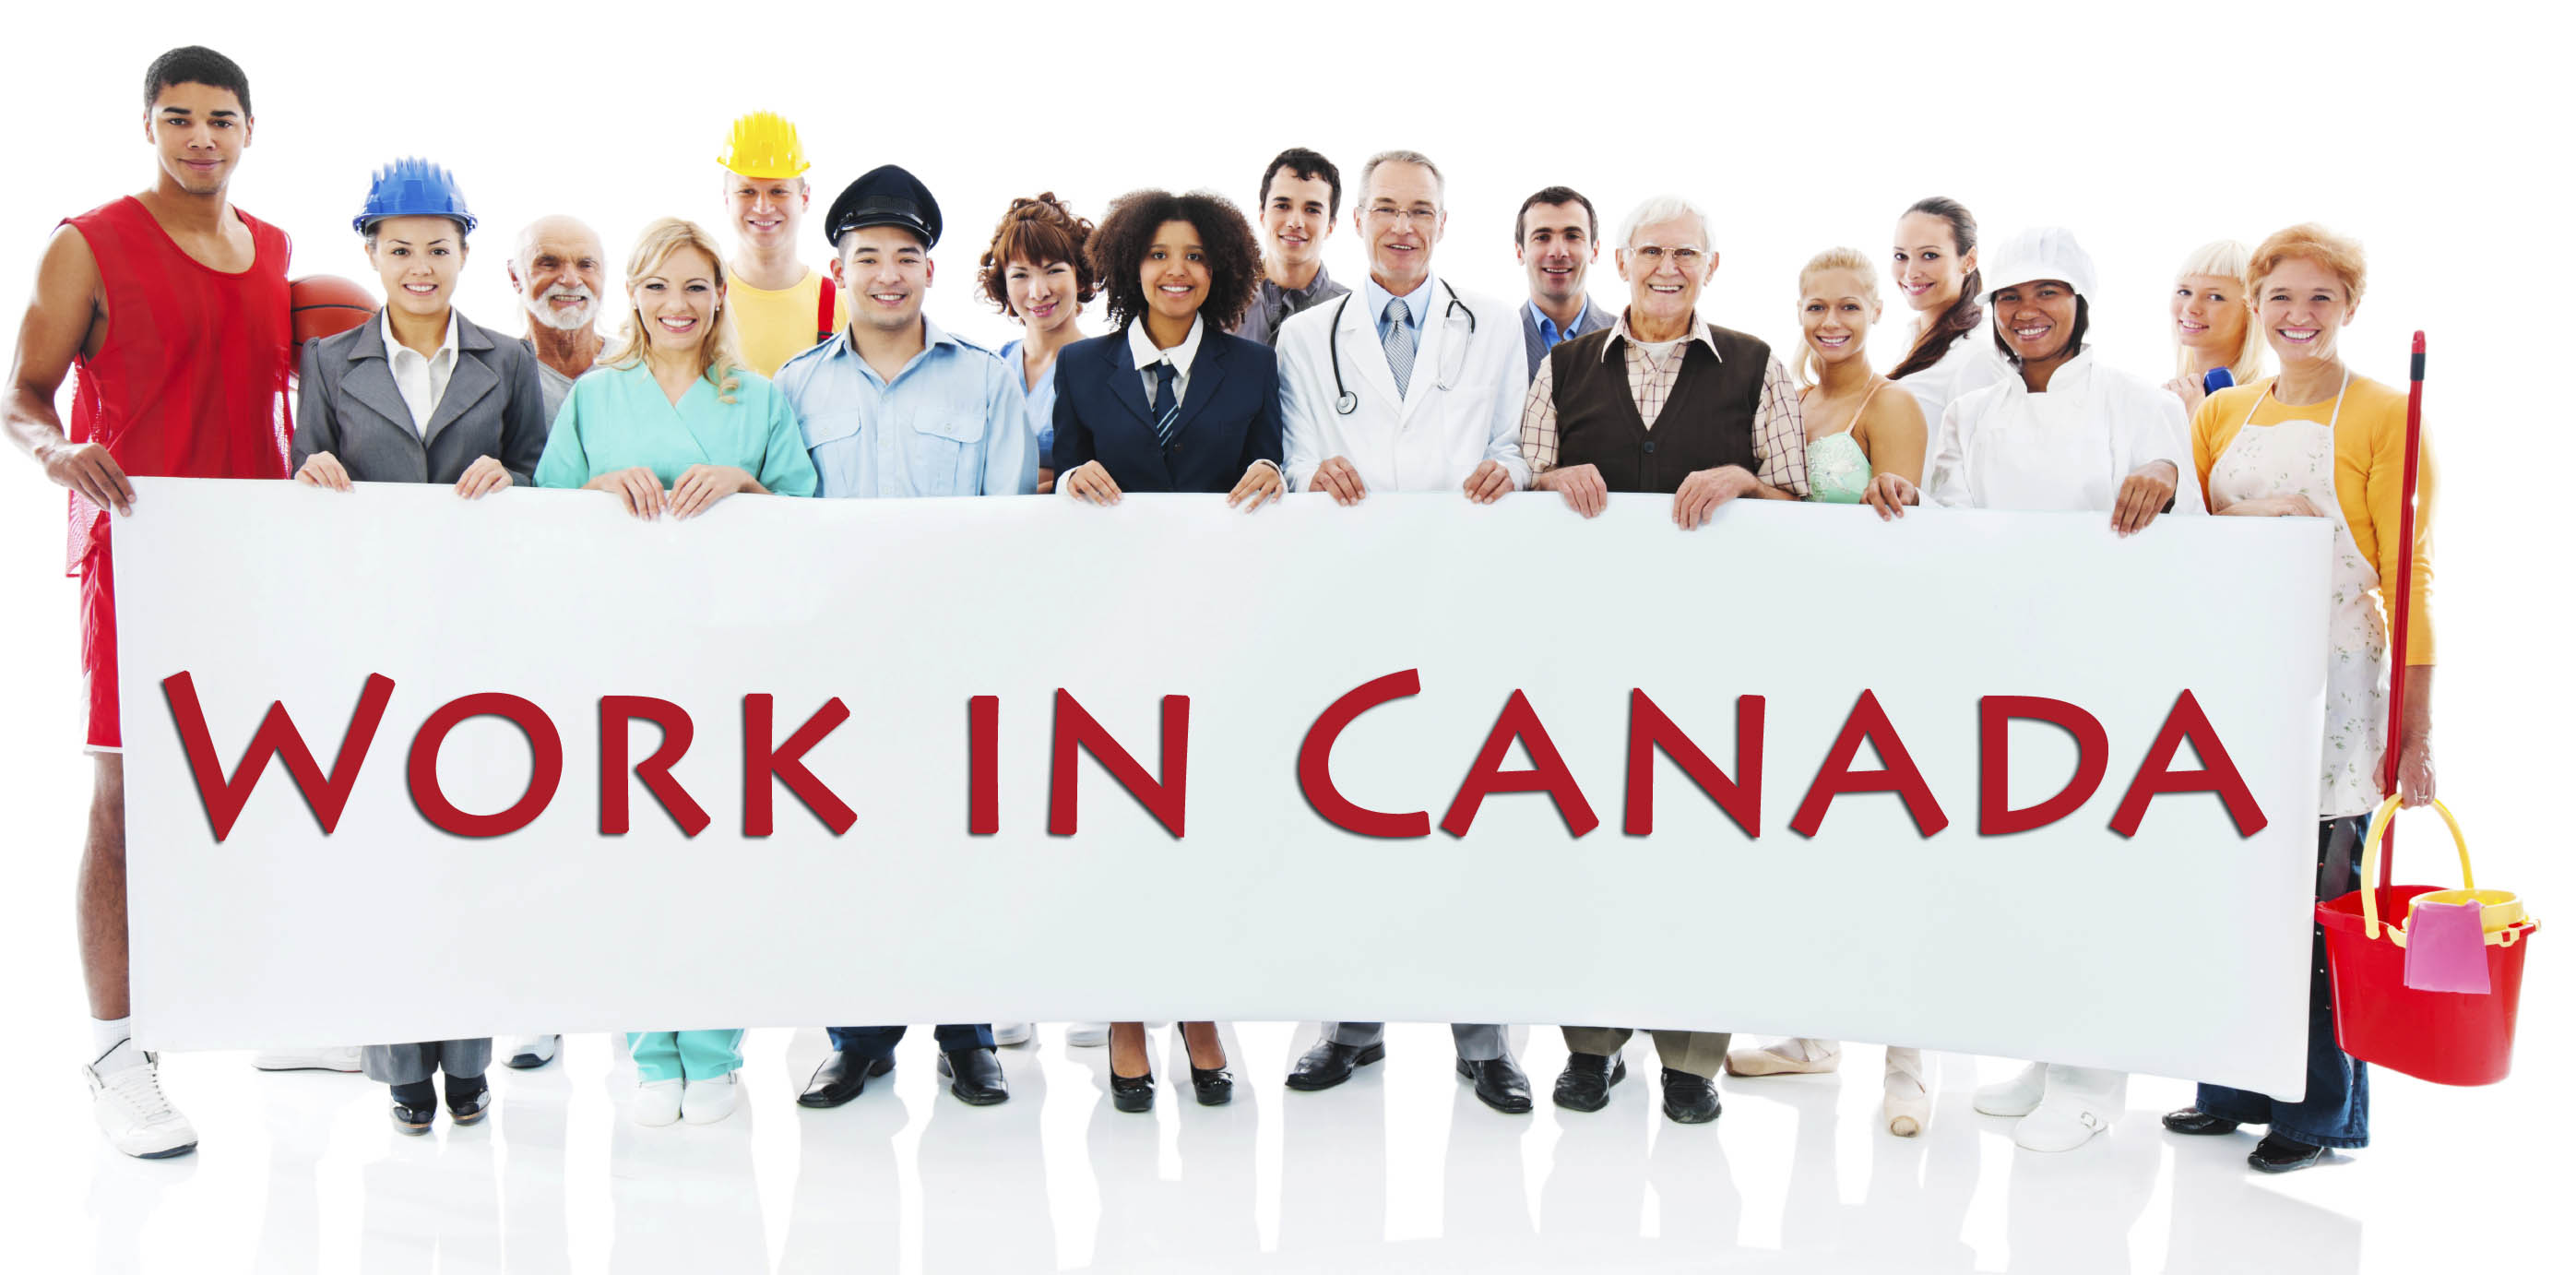 How To Get A Canada Work Permit, Live And Work In Canada